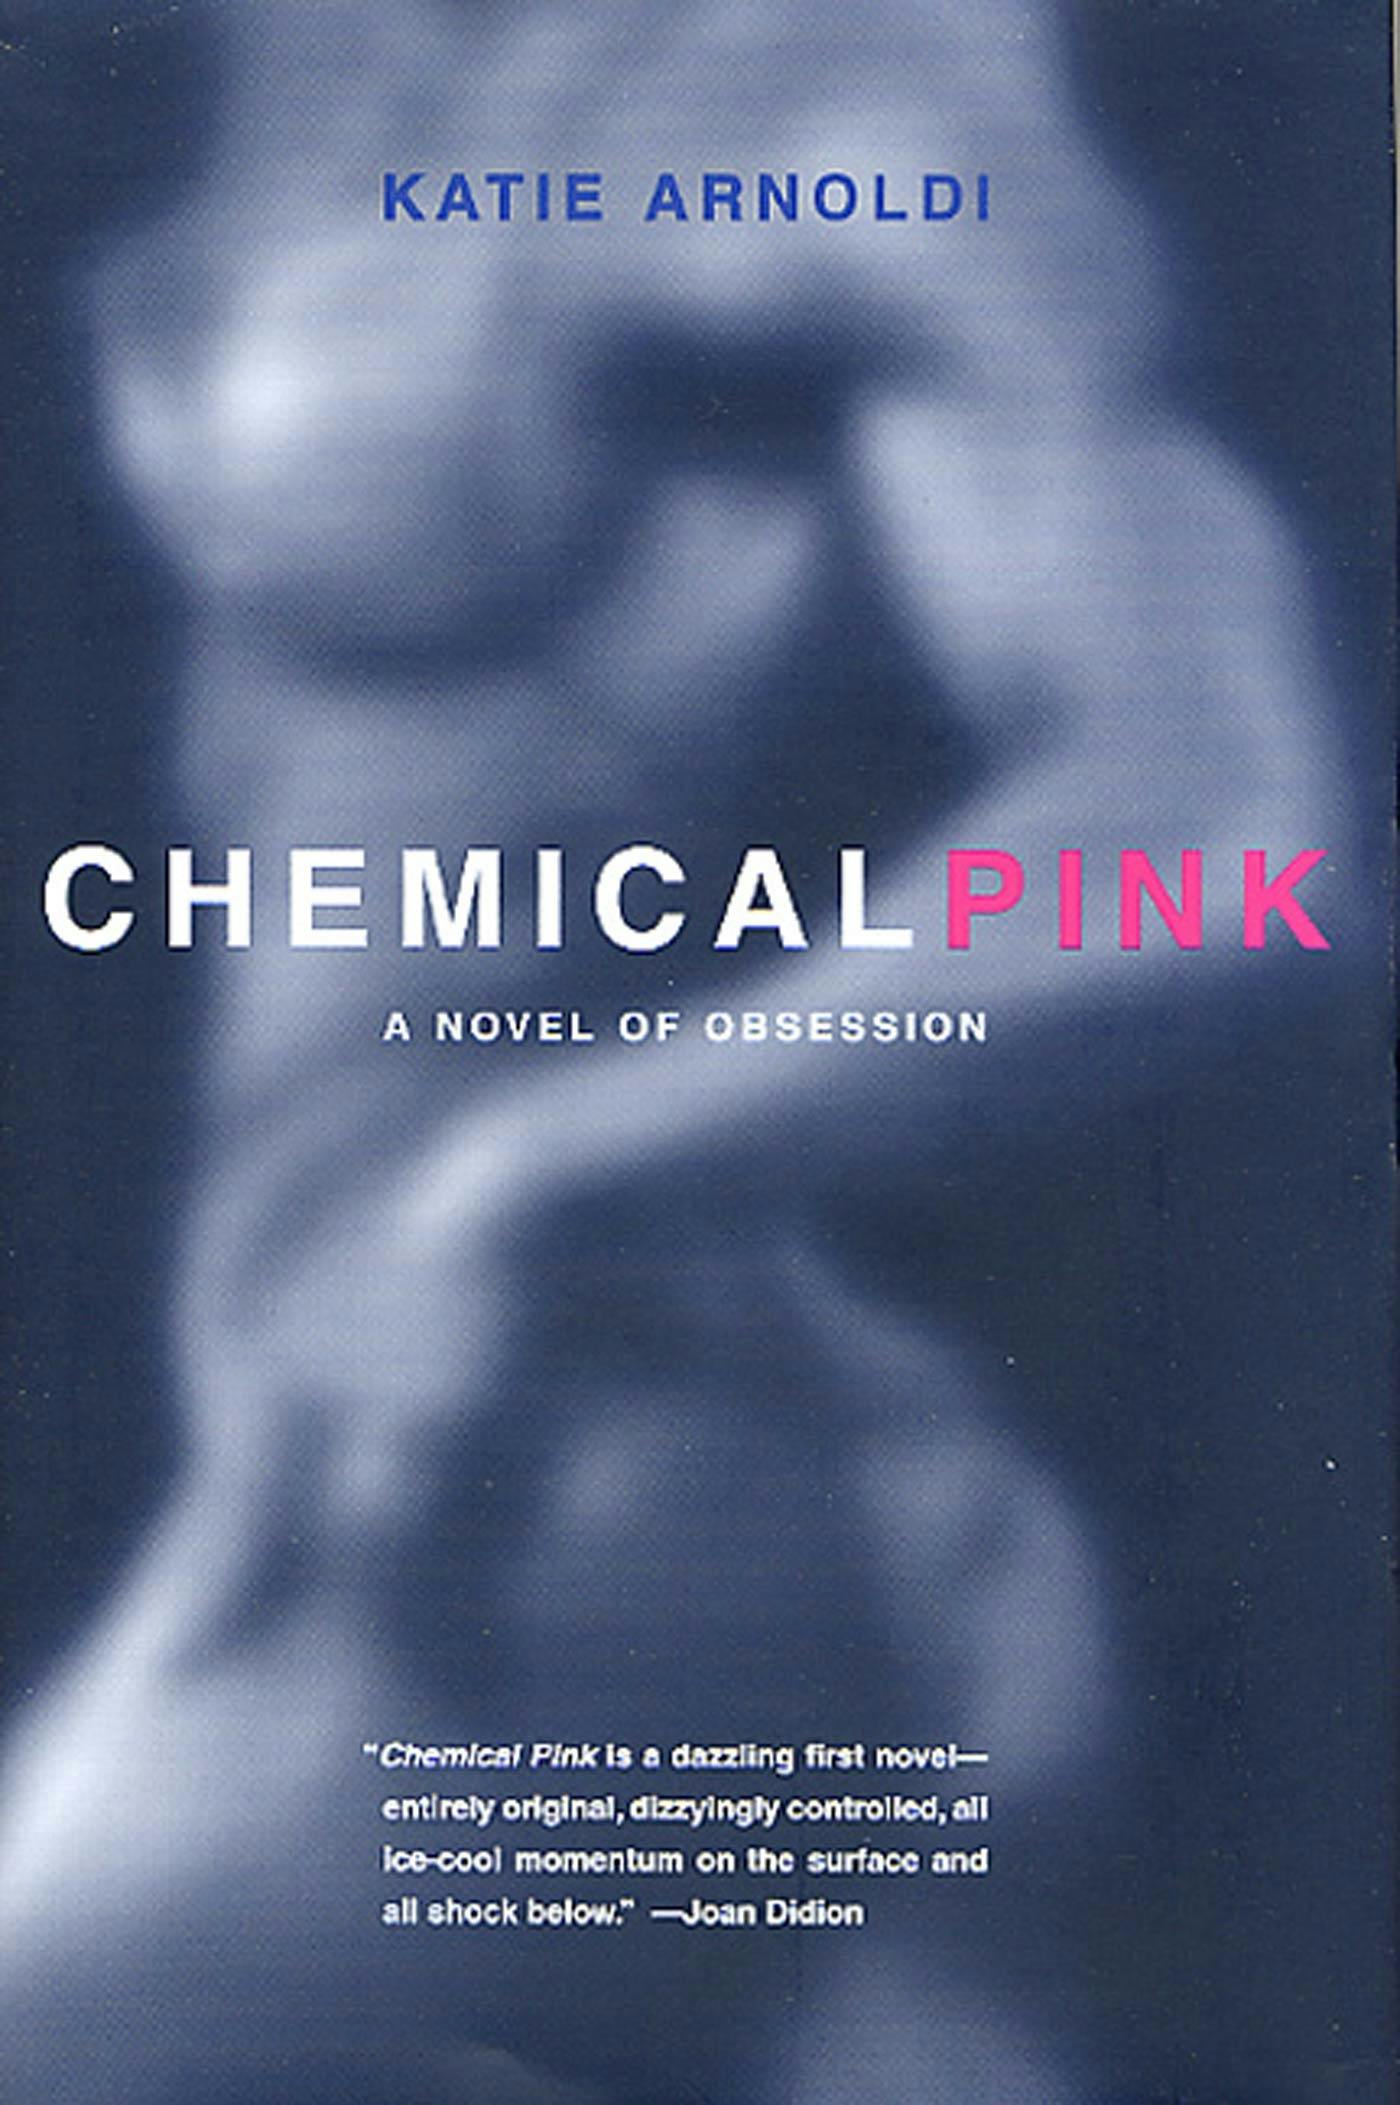 Cover for the book titled as: Chemical Pink